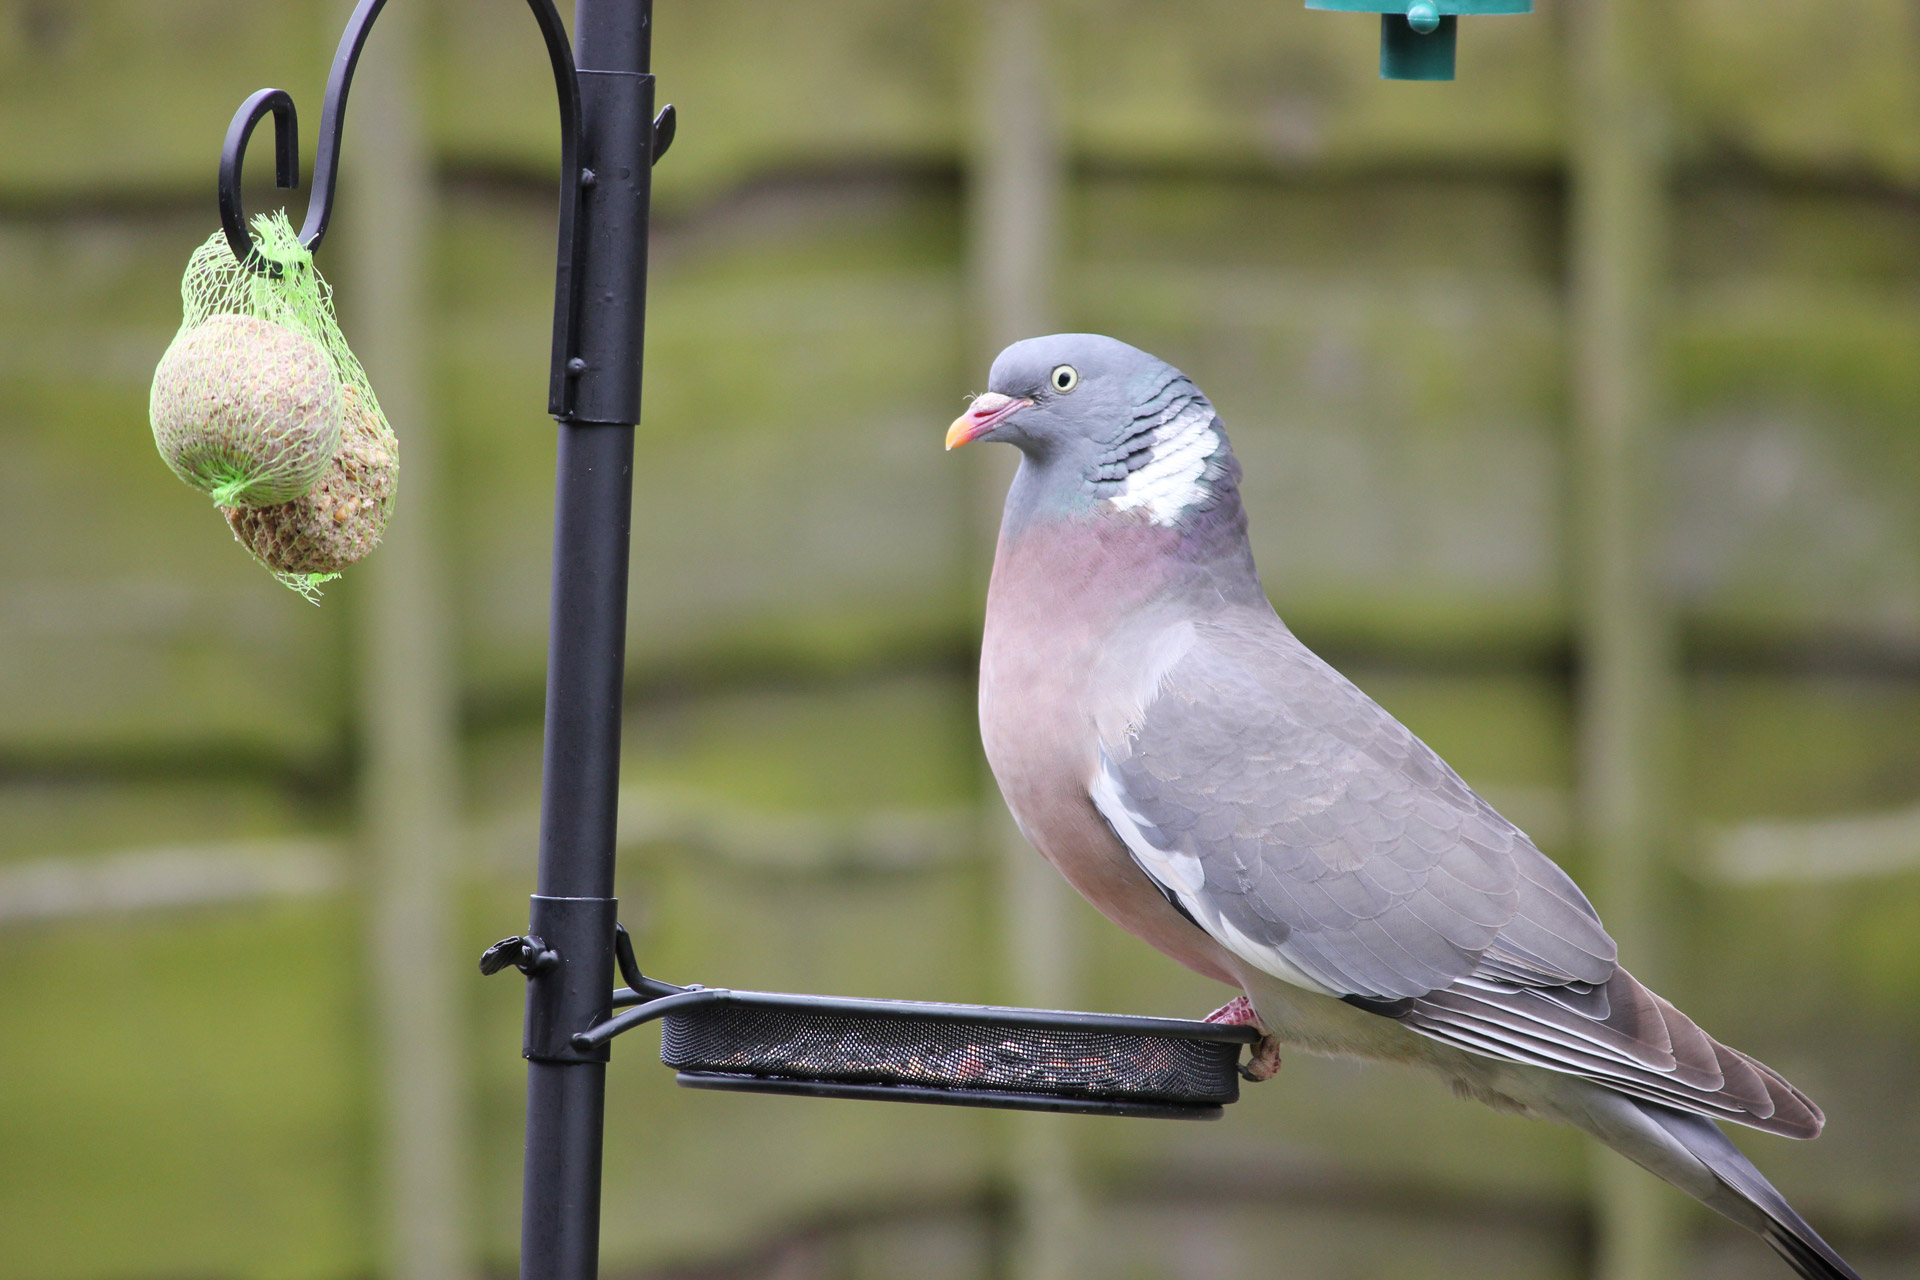 Pigeon stealing food from seed tray of a bird feeder